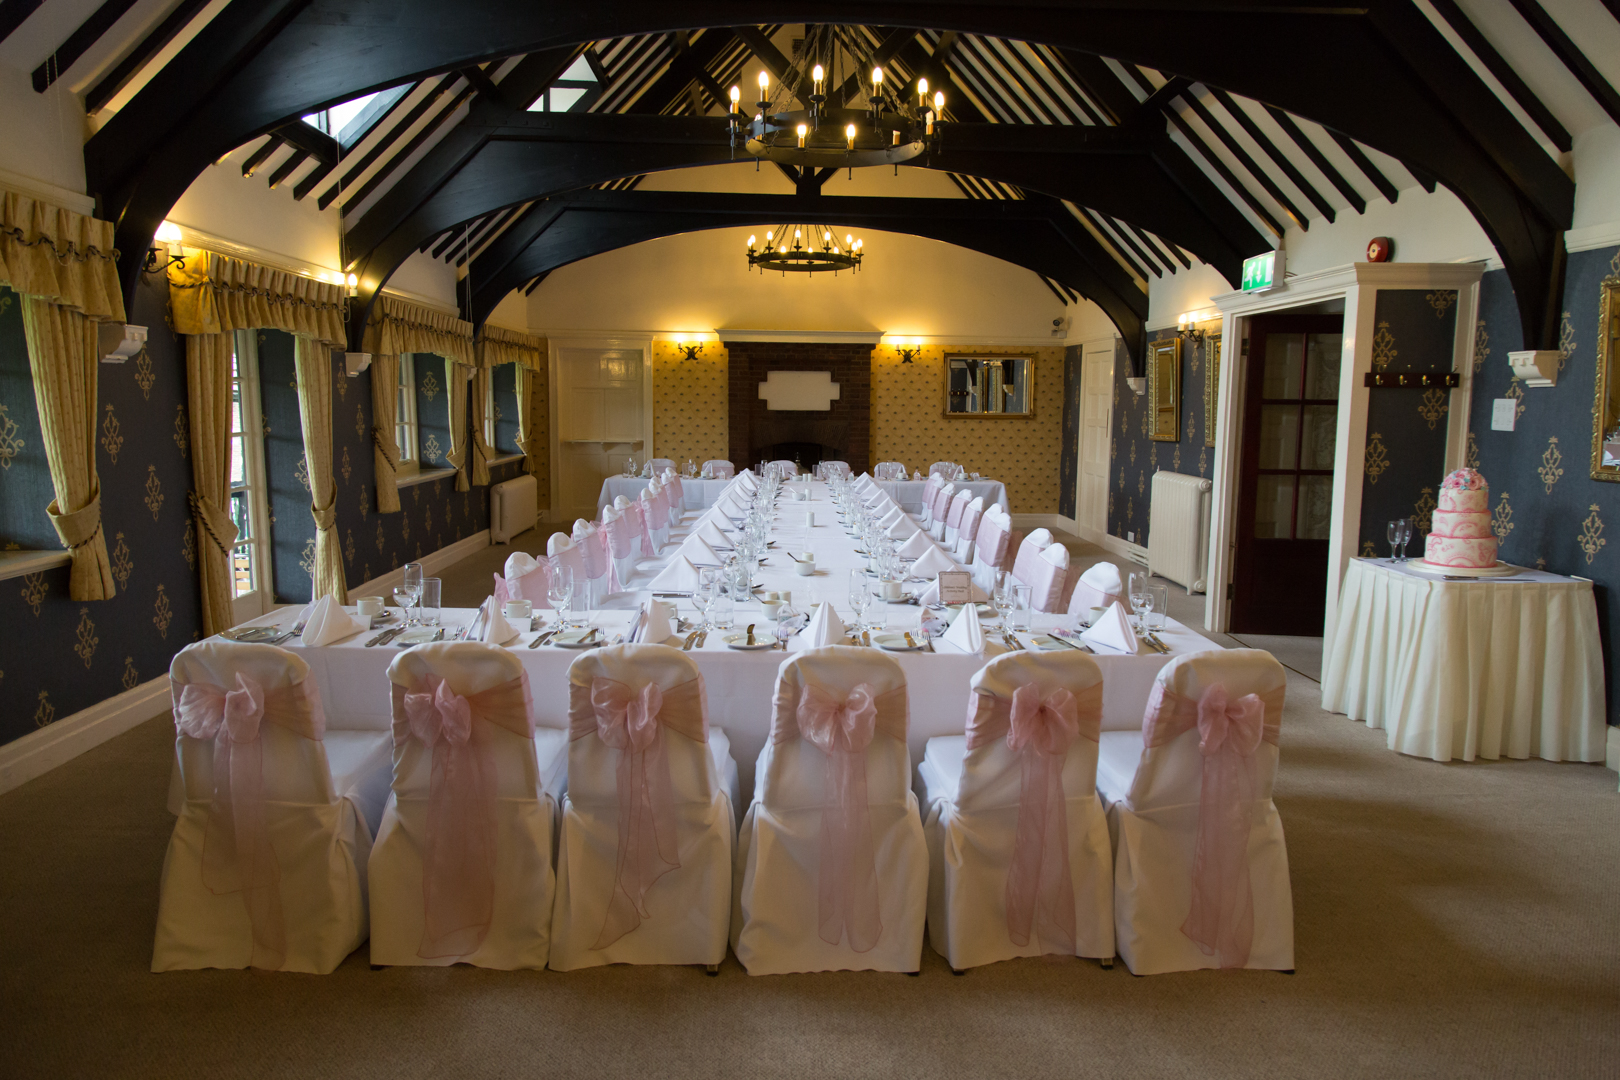 Cavendish Eastcote - upstairs room photographed by Tim Durham of Pinner wedding photography.